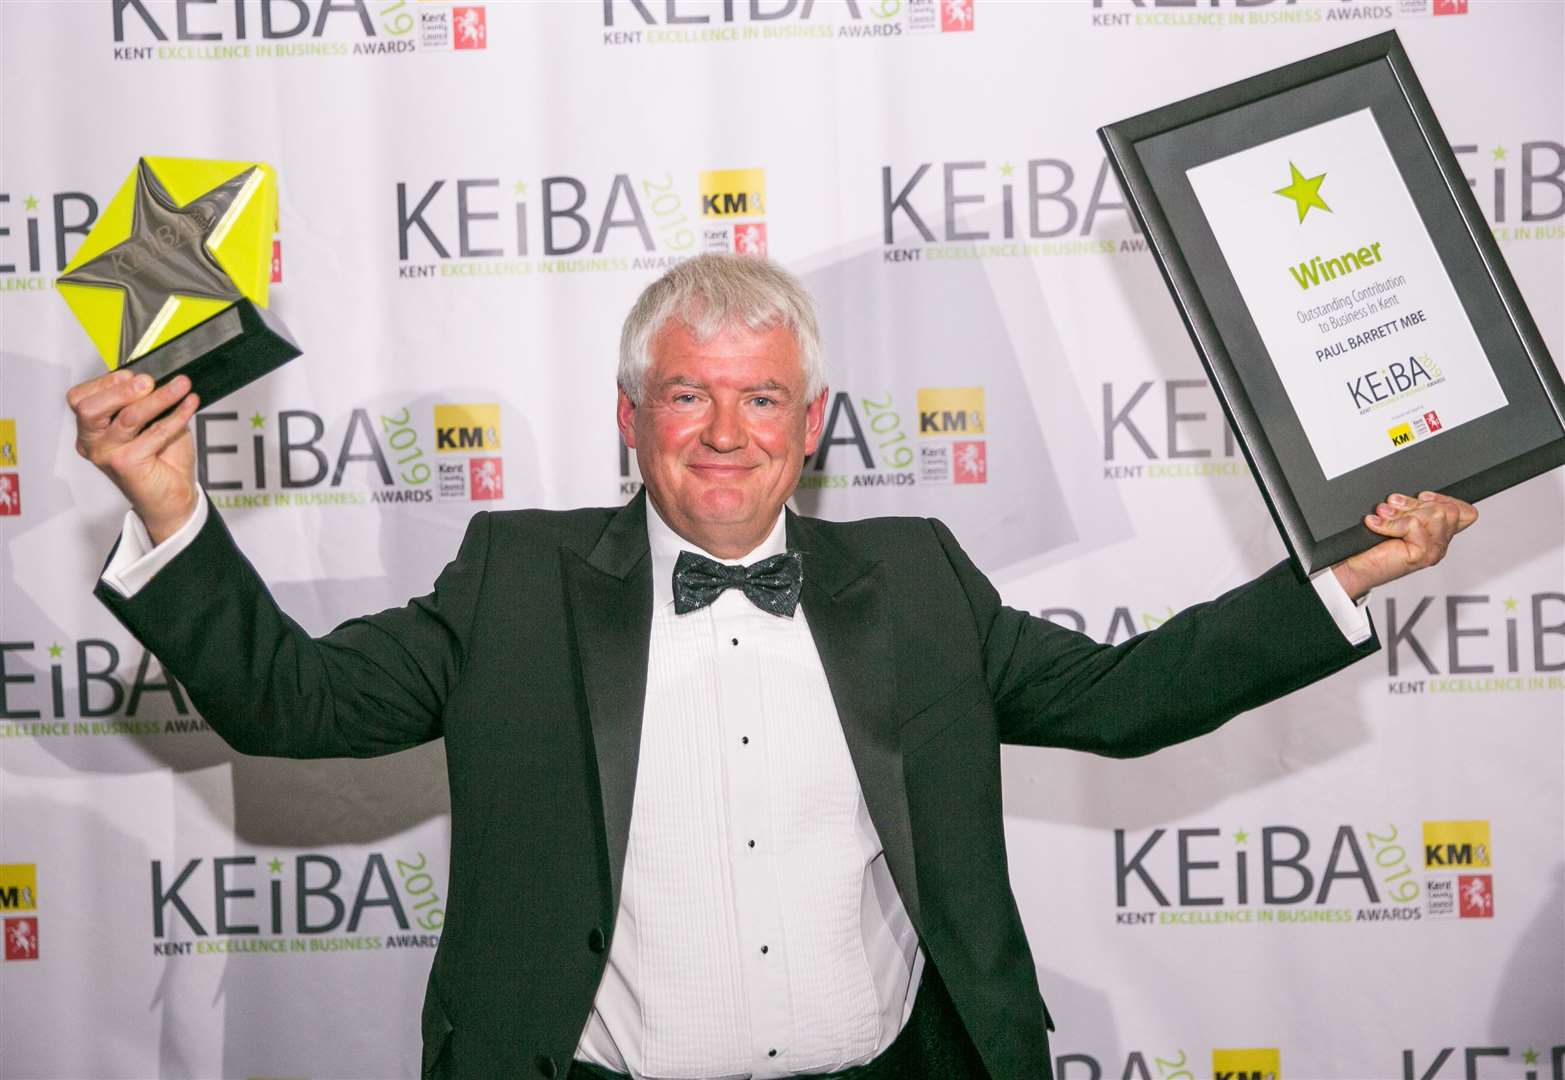 Paul Barrett collected the Outstanding Contribution to Business in Kent Award in 2019